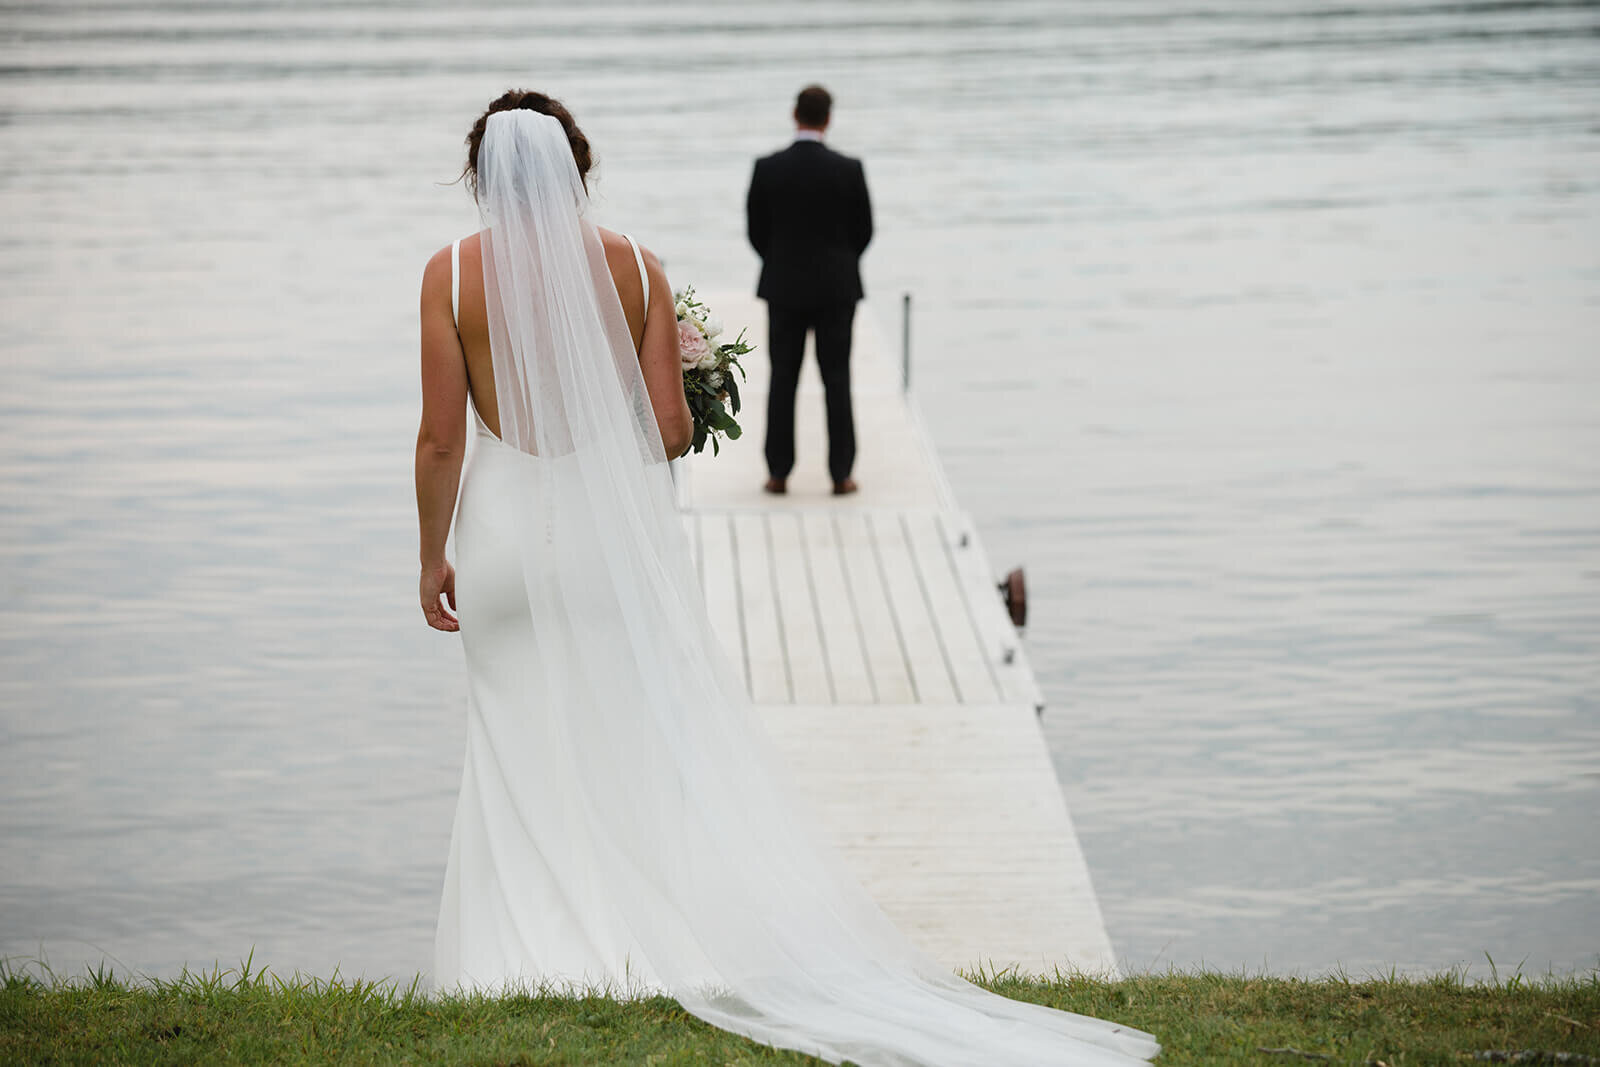  Bride walks toward groom for first look on dock. Small outdoor wedding on a lake in Maine. 